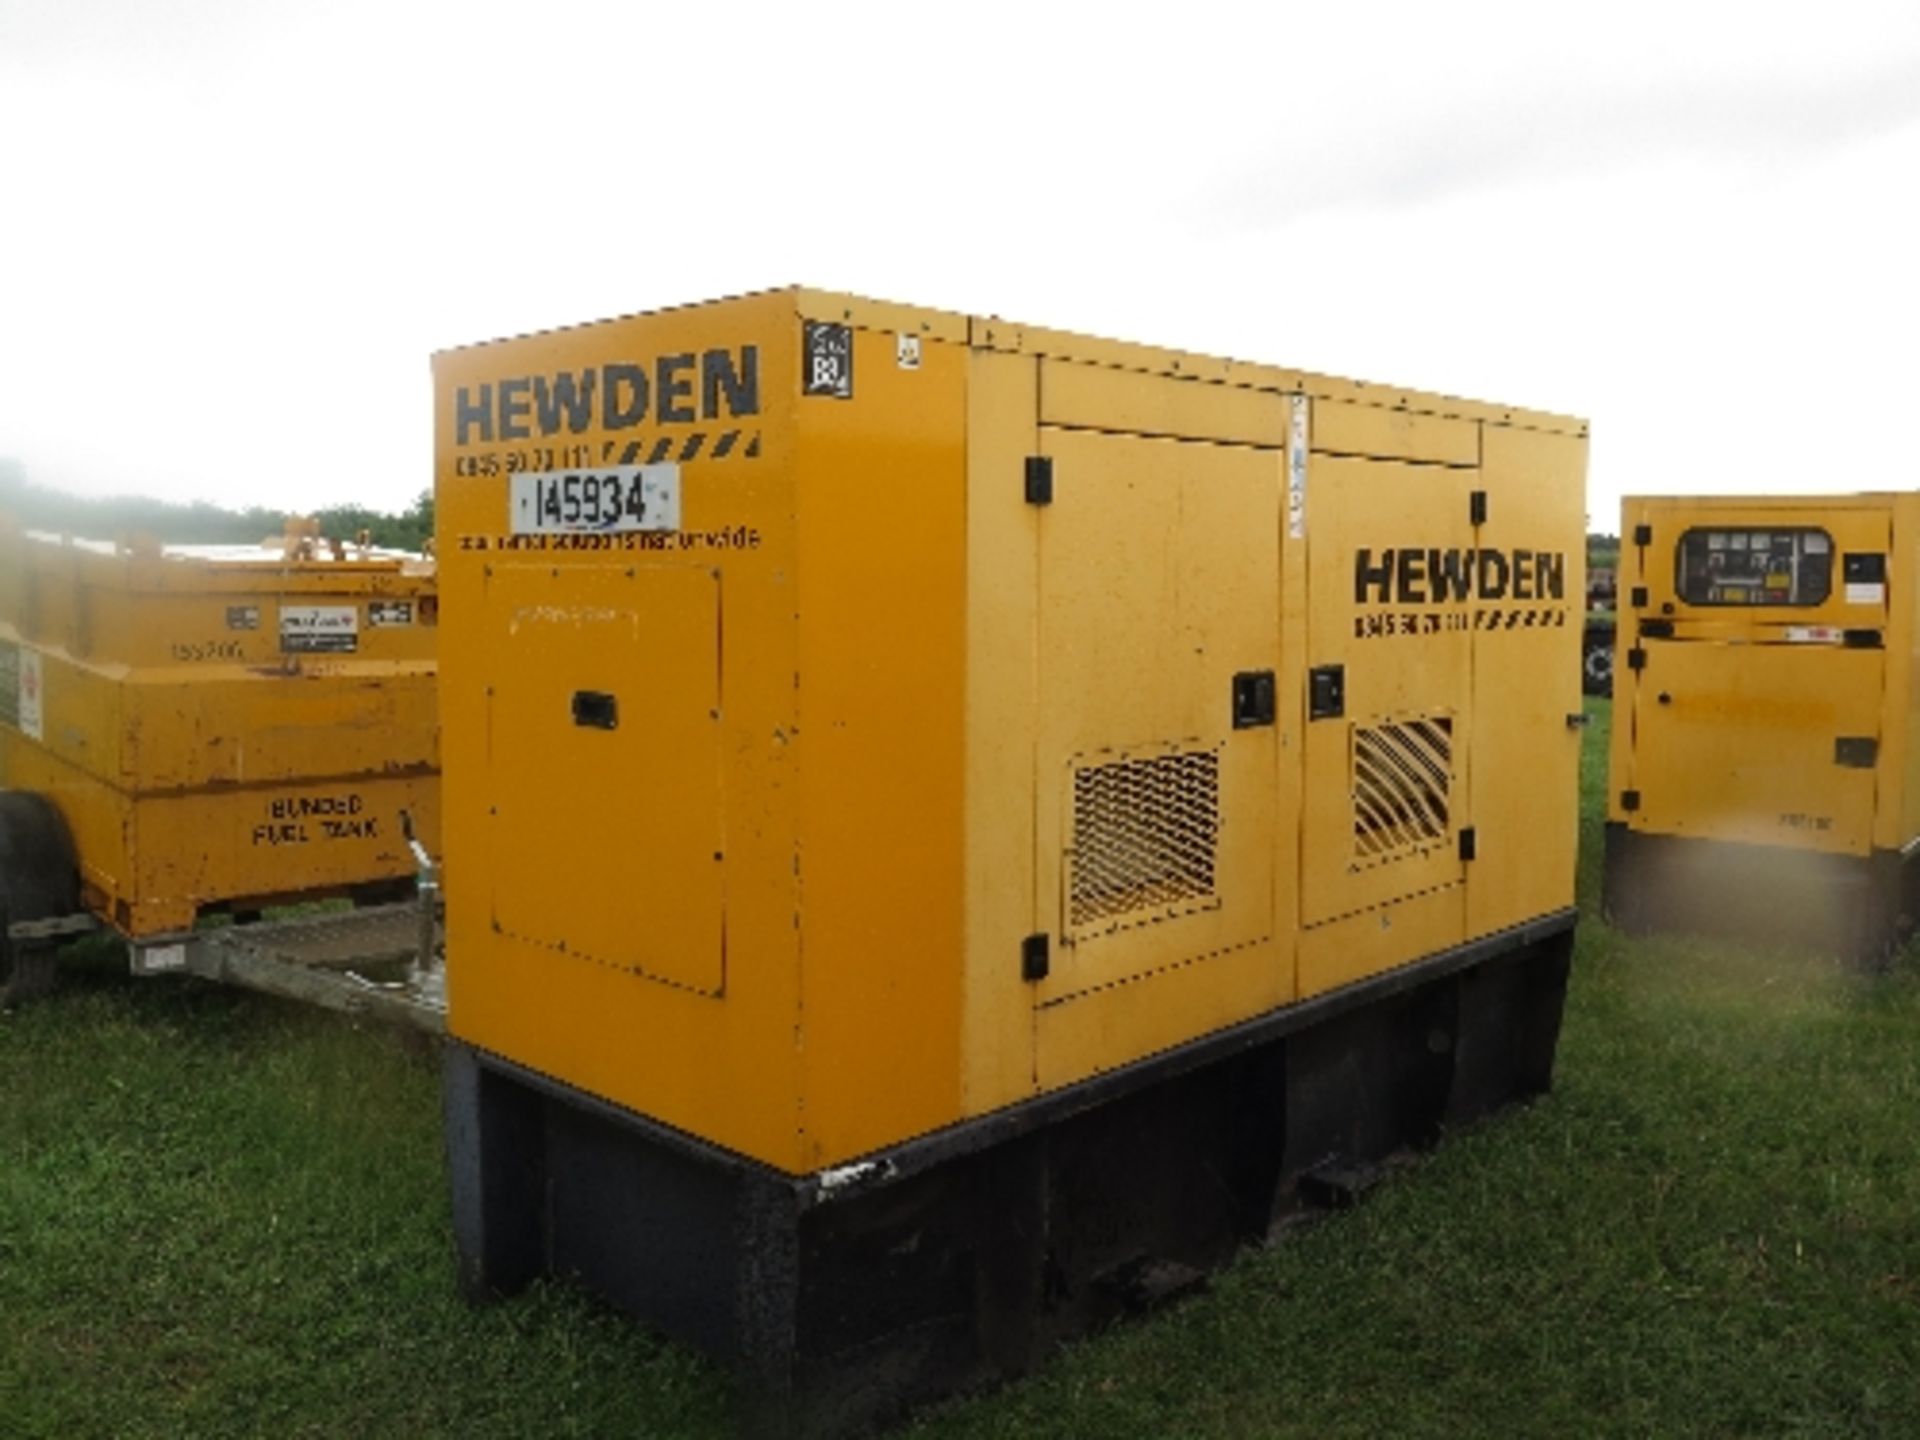 Caterpillar XQE80 generator 10433 hrs 145934
PERKINS - RUNS AND MAKES POWER
ALL LOTS are SOLD AS